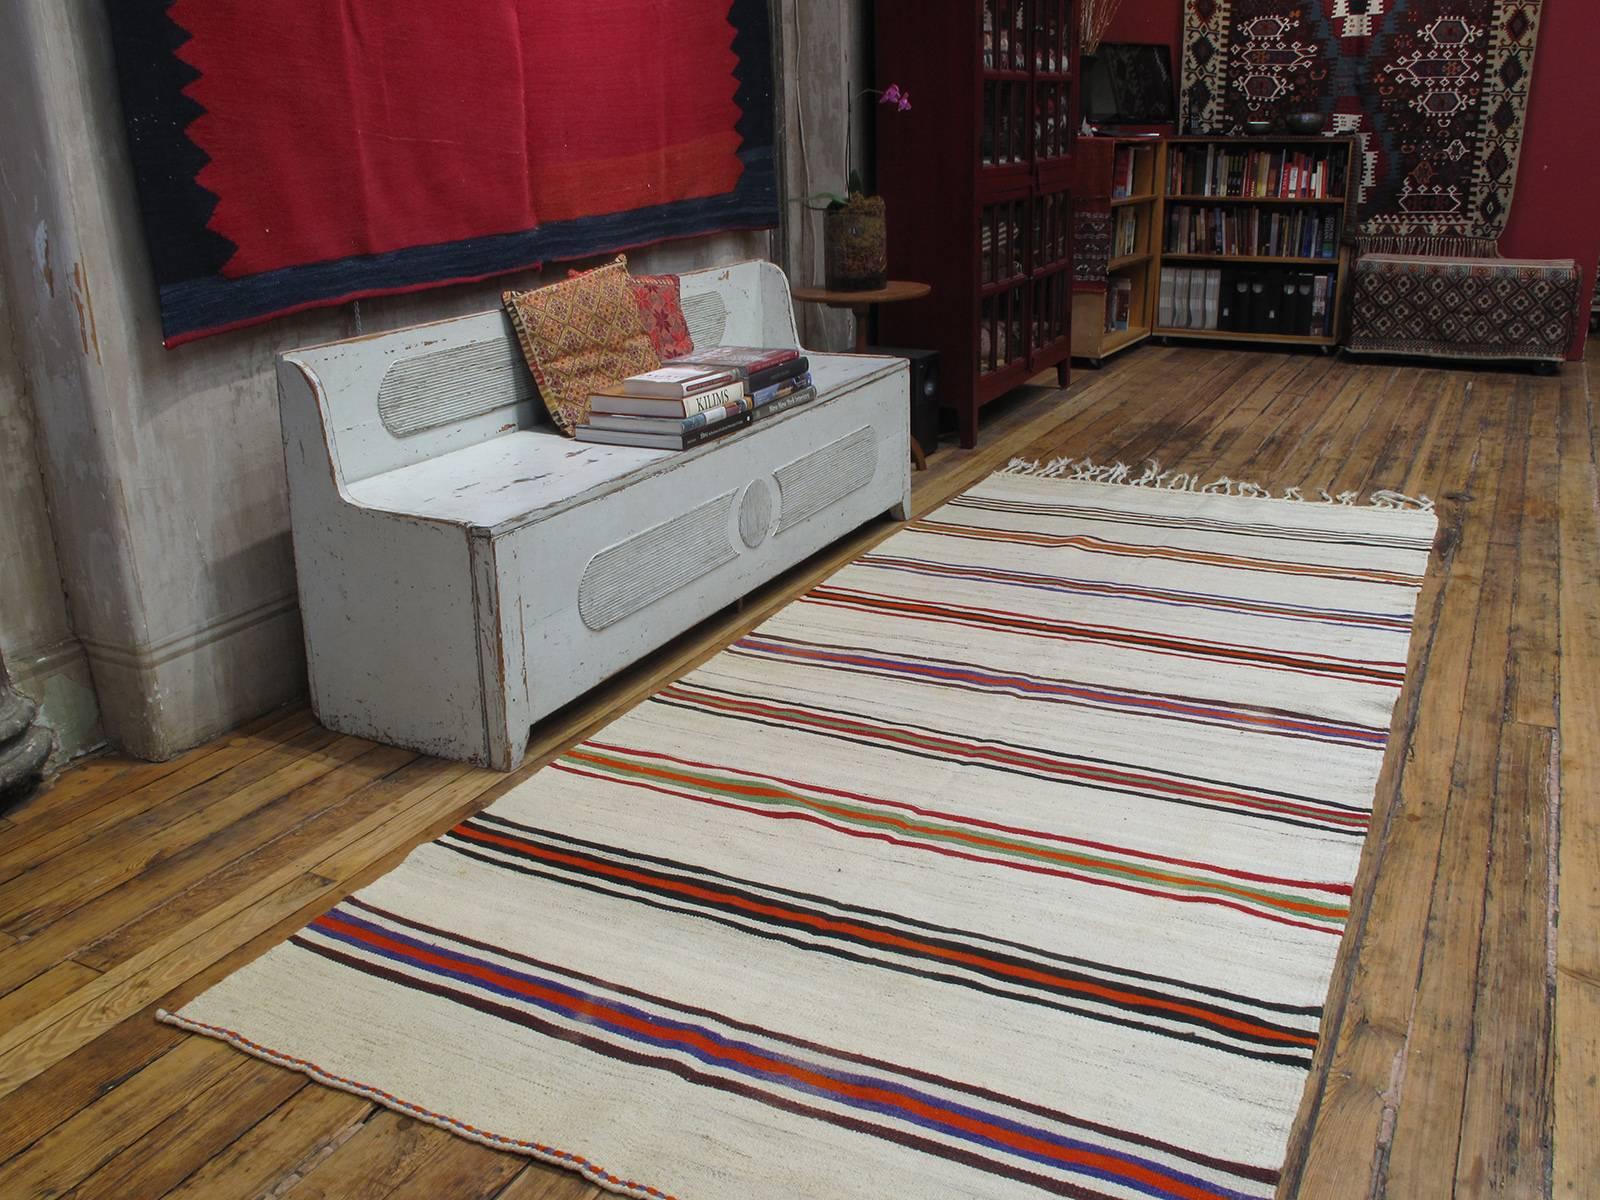 Banded Kilim wide runner rug. A very good example of this type of runner rug with brilliant colors. Very well preserved with complete original ends.